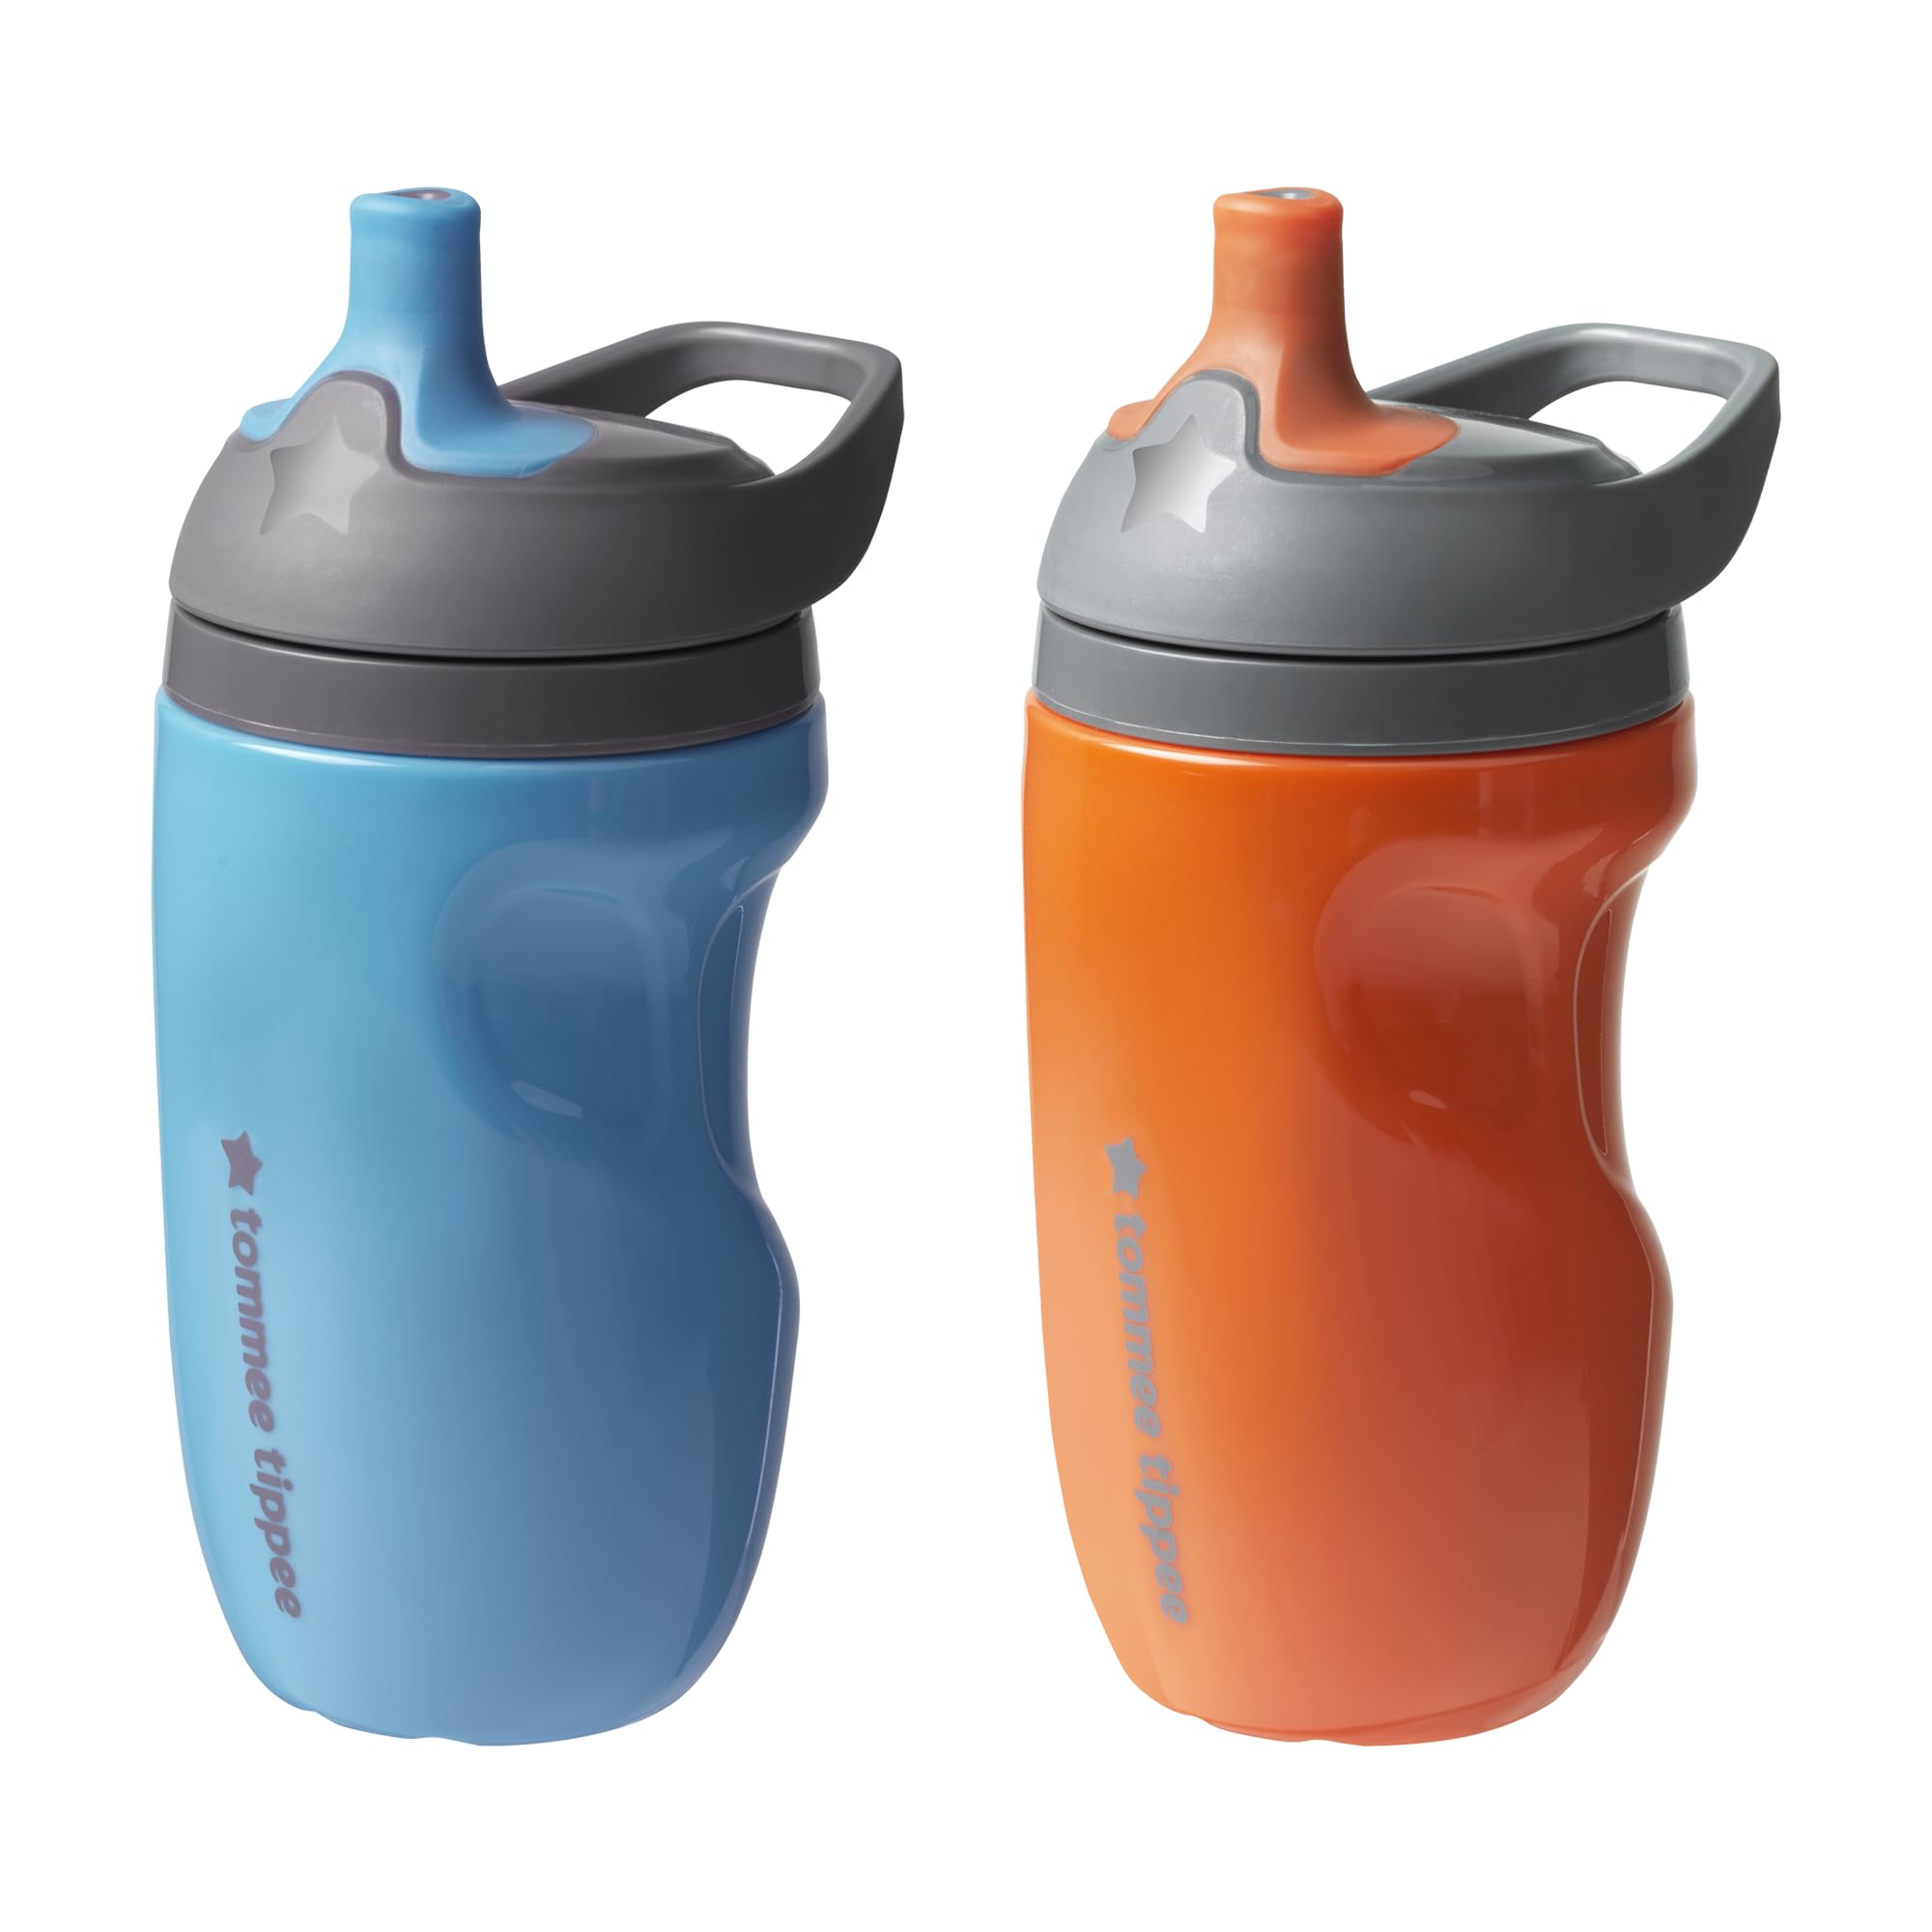 Tommee Tippee Insulated Sportee Bottle, Sippy Cup for Toddlers, 12 months+, 9oz, Spill-Proof, Easy to Hold Handle, Bite Resistant Spout, Pack of 2, Blue and Orange